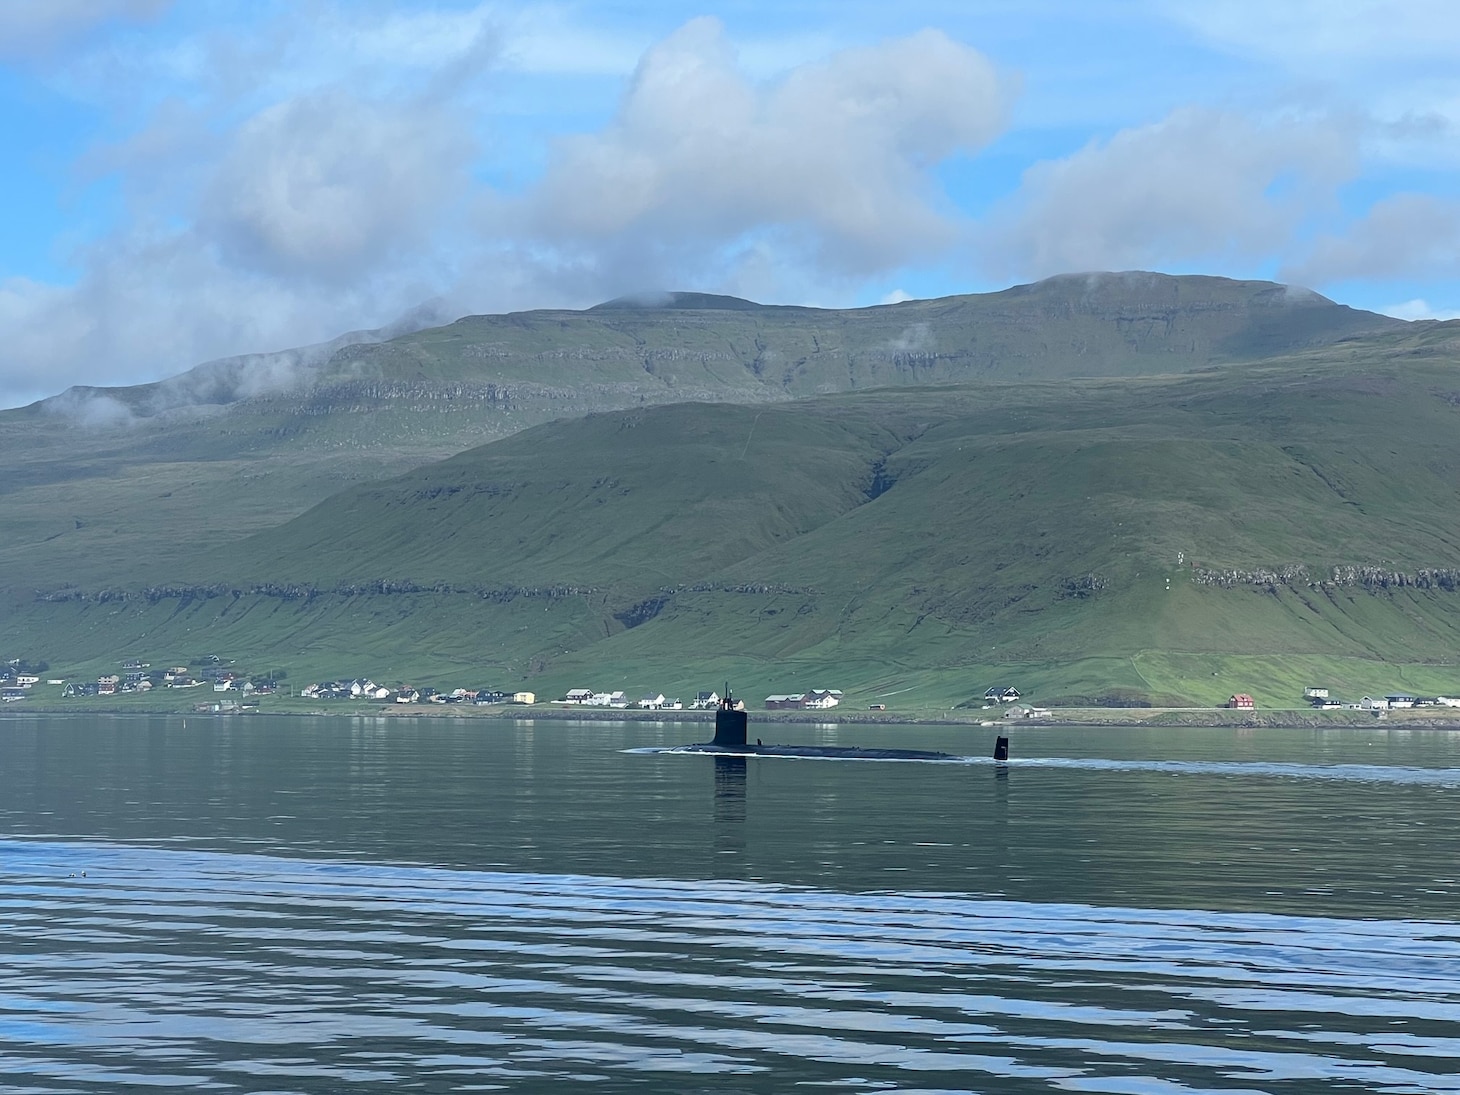 The Virginia-class attack submarine USS Delaware (SSN 791) arrived in Tórshavn for a scheduled port visit, marking the first time a U.S. nuclear powered submarine has moored in the Faroe Islands, June 26, 2023. Delaware, the seventh U.S Navy ship and first submarine named after the first U.S. state of Delaware, is a flexible, multi-mission platform designed to carry out the seven core competencies of the submarine force: anti-submarine warfare; anti-surface warfare; delivery of special operations forces; strike warfare; irregular warfare; intelligence, surveillance and reconnaissance; and mine warfare. (U.S. Navy photo by Cmdr. Michael N. Mowry)